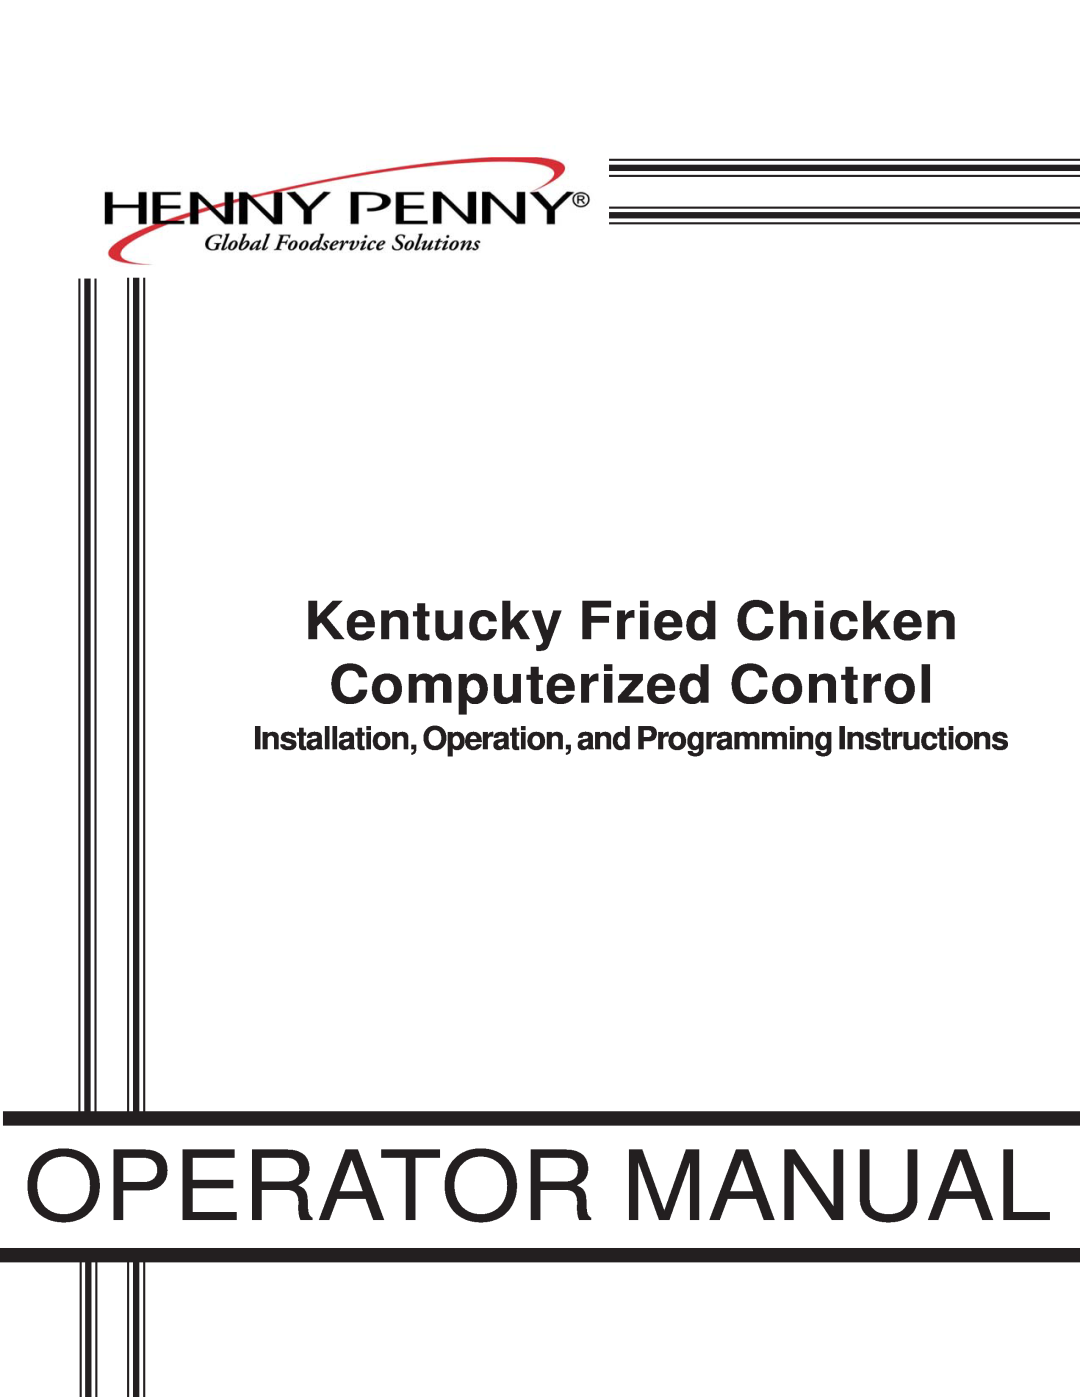 Henny Penny FM07-020-F manual Operator Manual, Kentucky Fried Chicken Computerized Control 